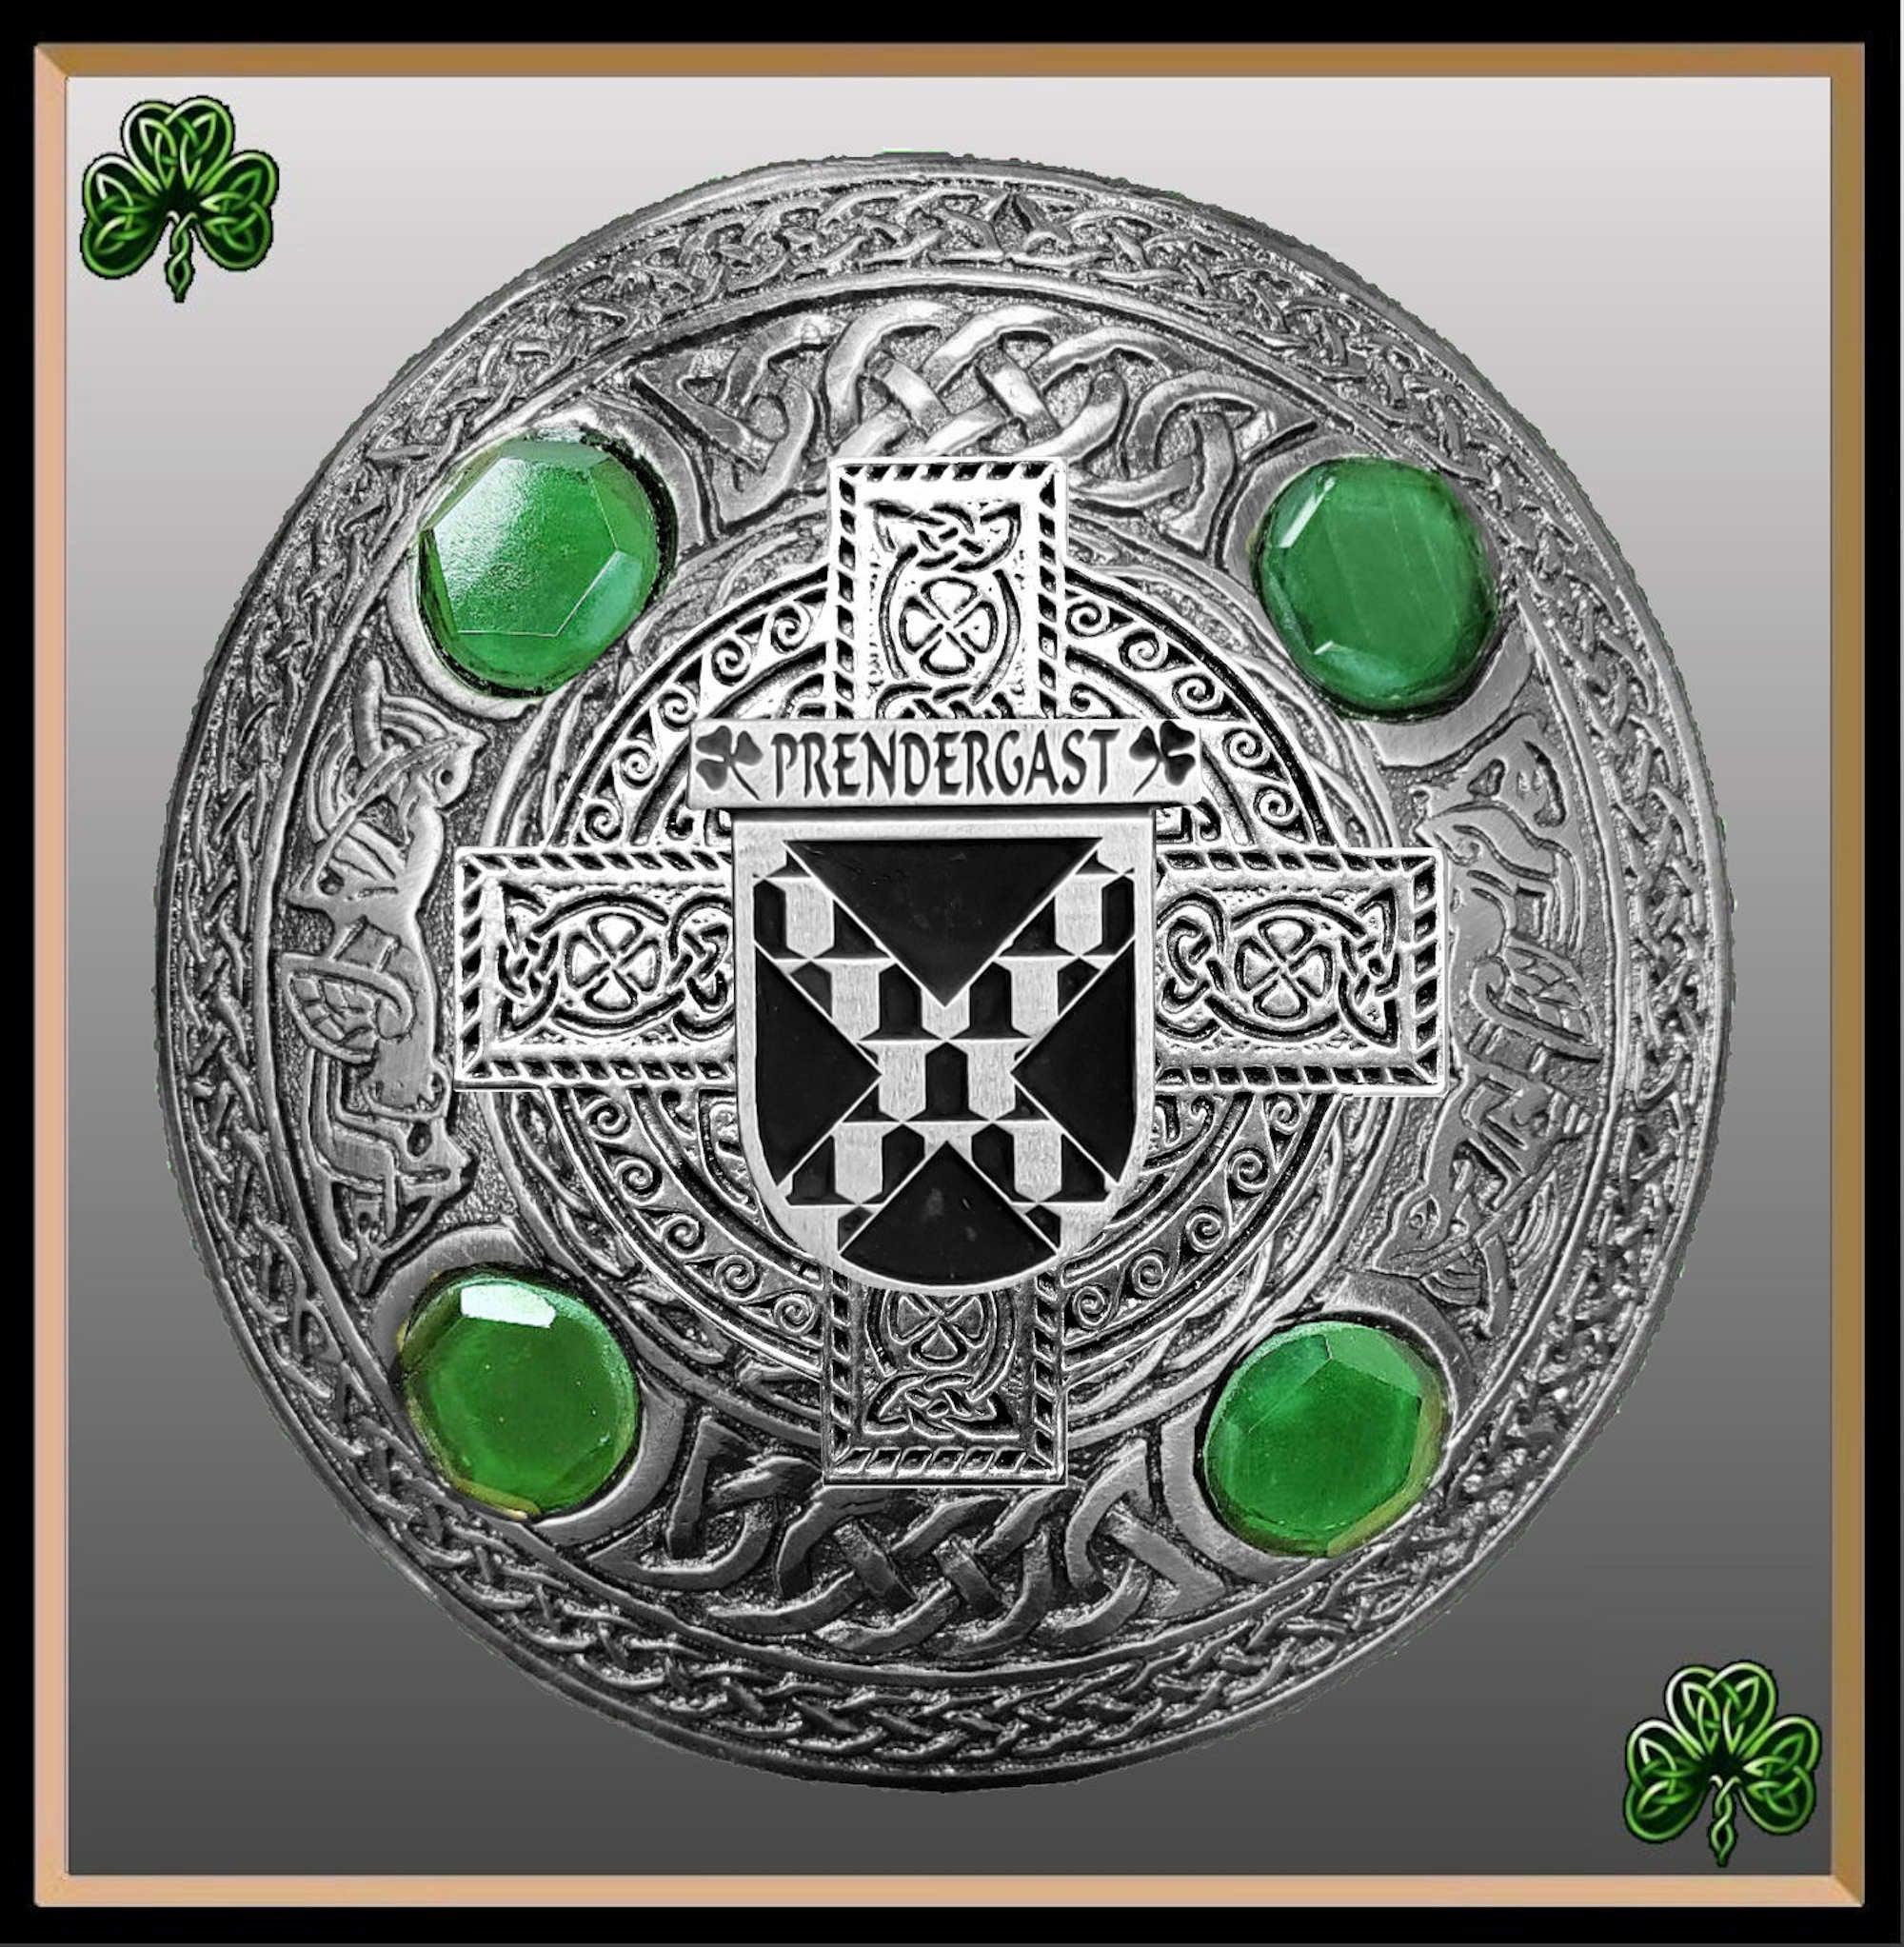 Prendergast (Tipperary) Irish Coat of Arms Celtic Cross Plaid Brooch with Green Stones